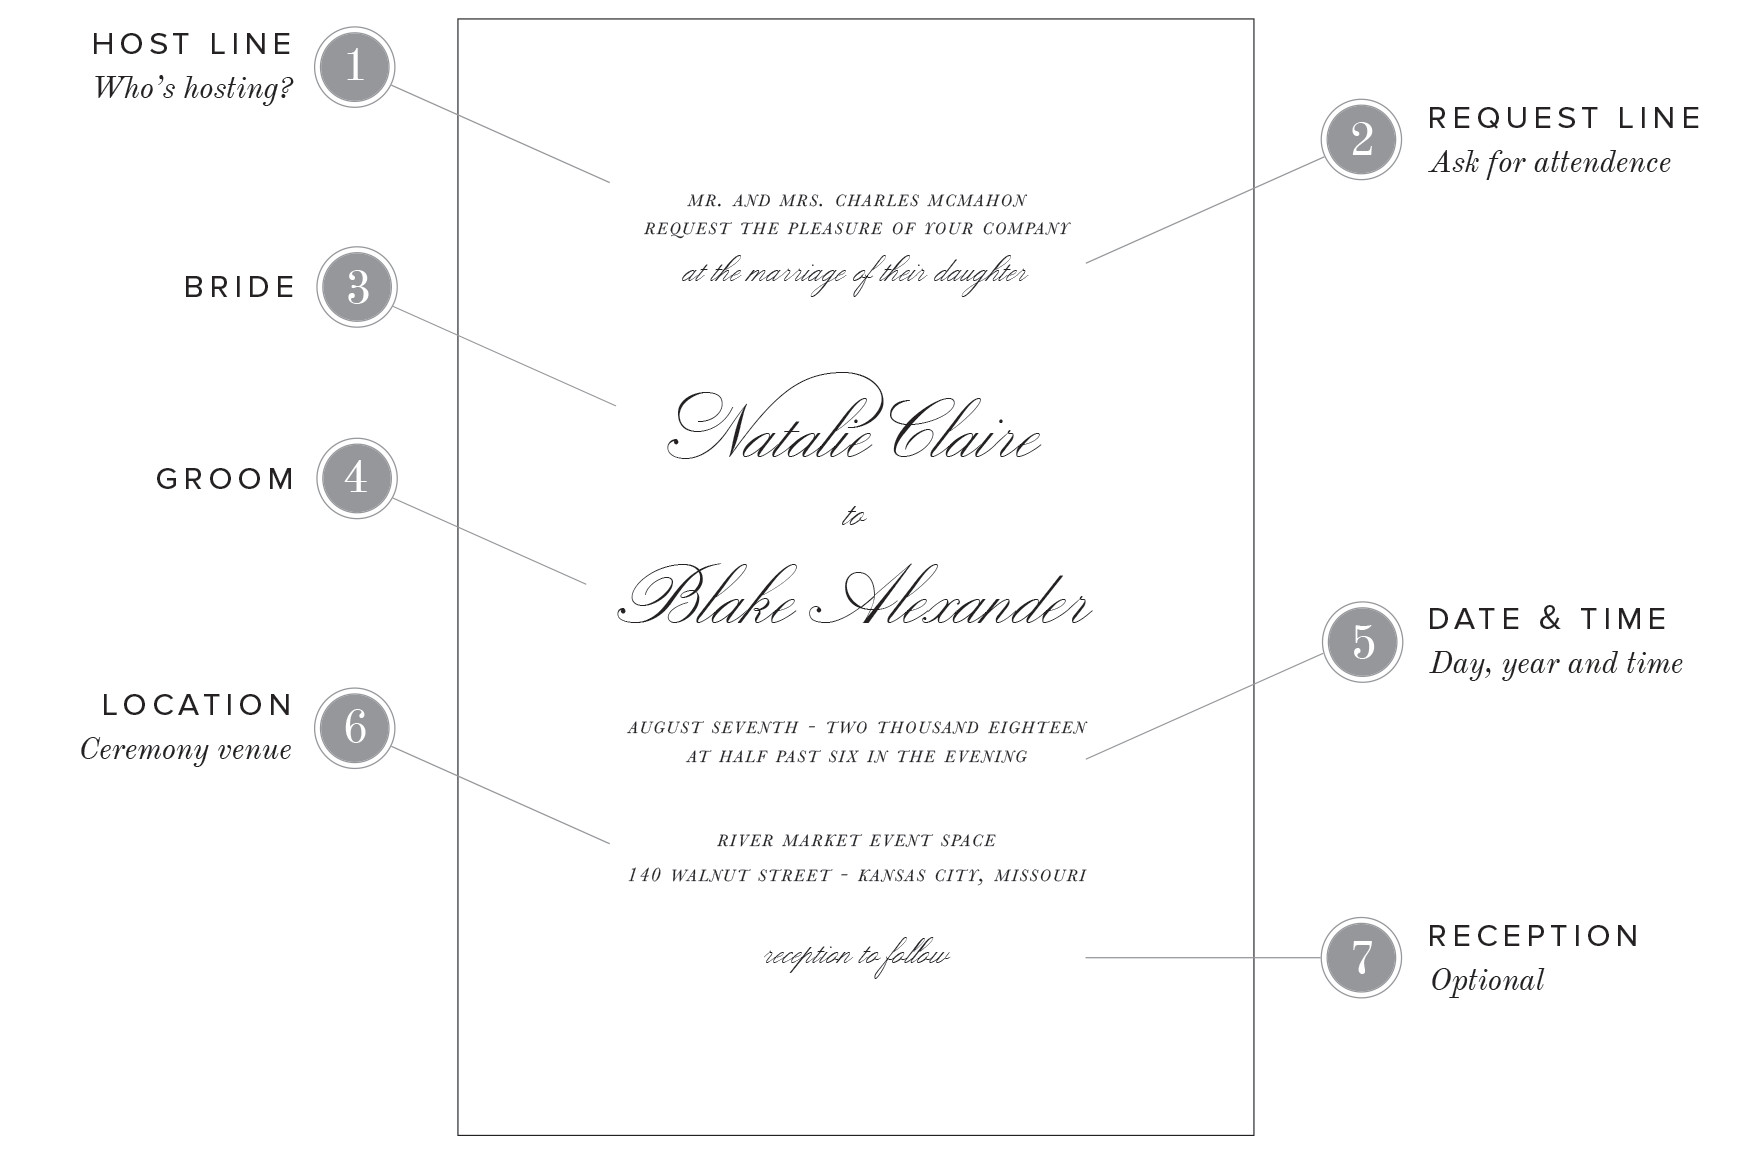 how to write a wedding invitation in sinhala png